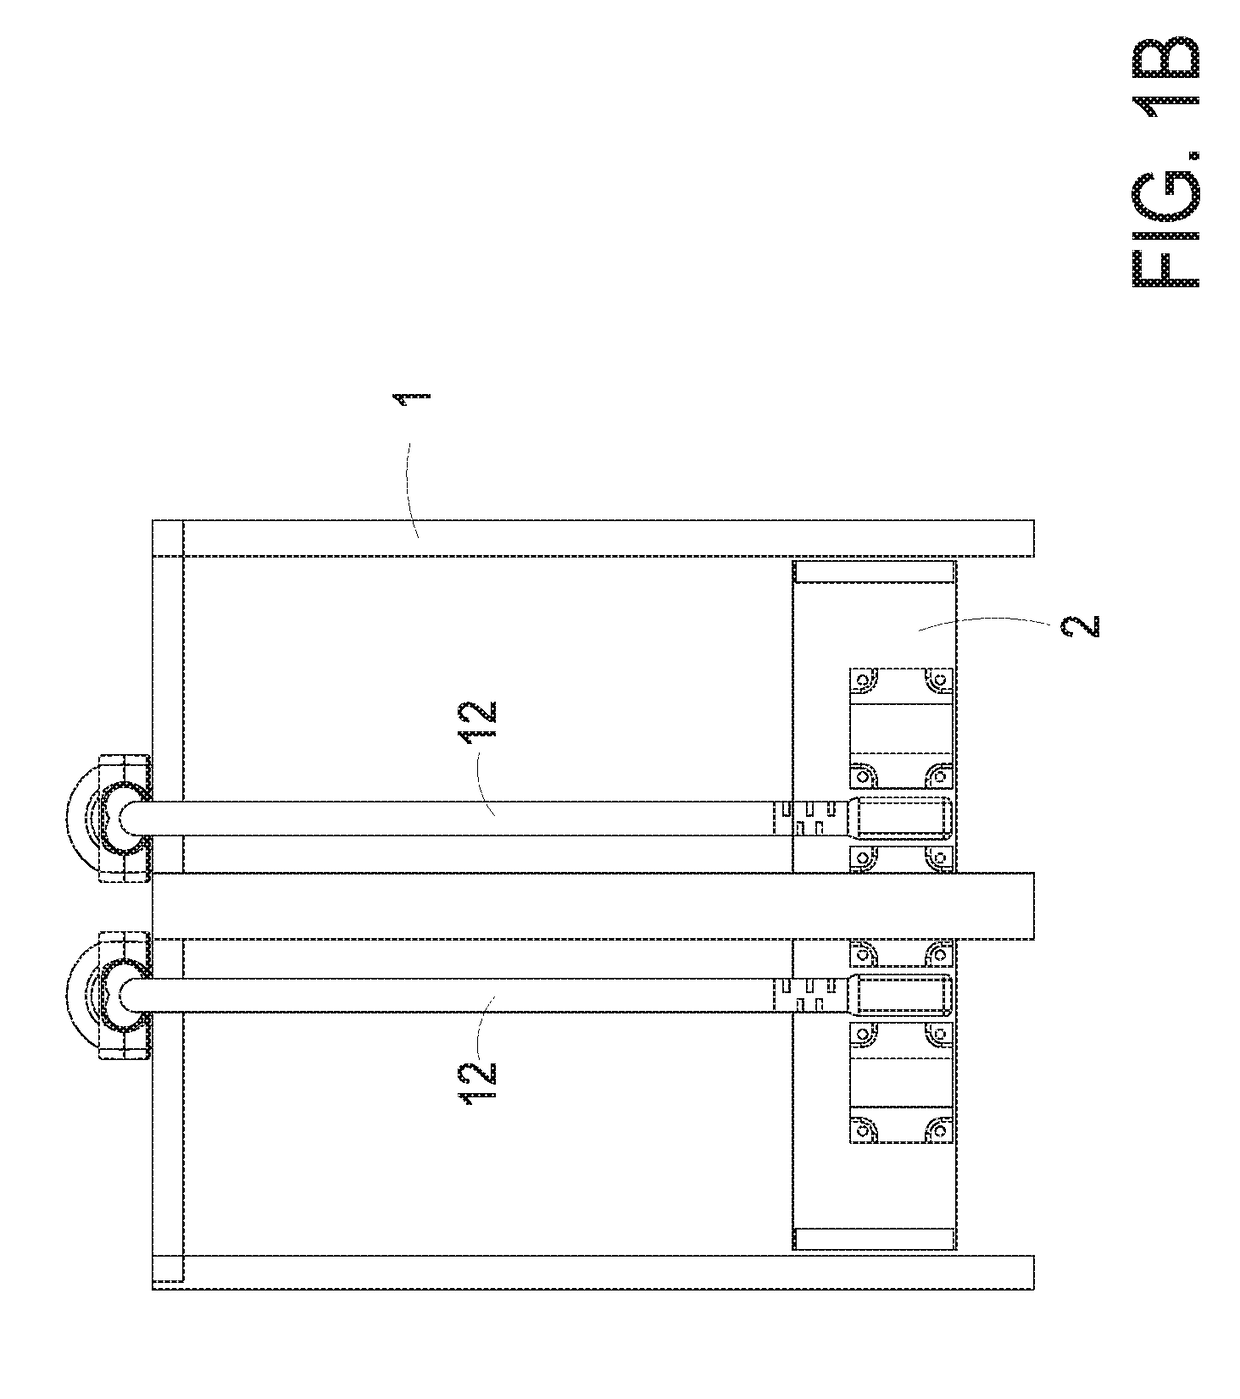 Multiple input power distribution shelf and bus bar assembly thereof